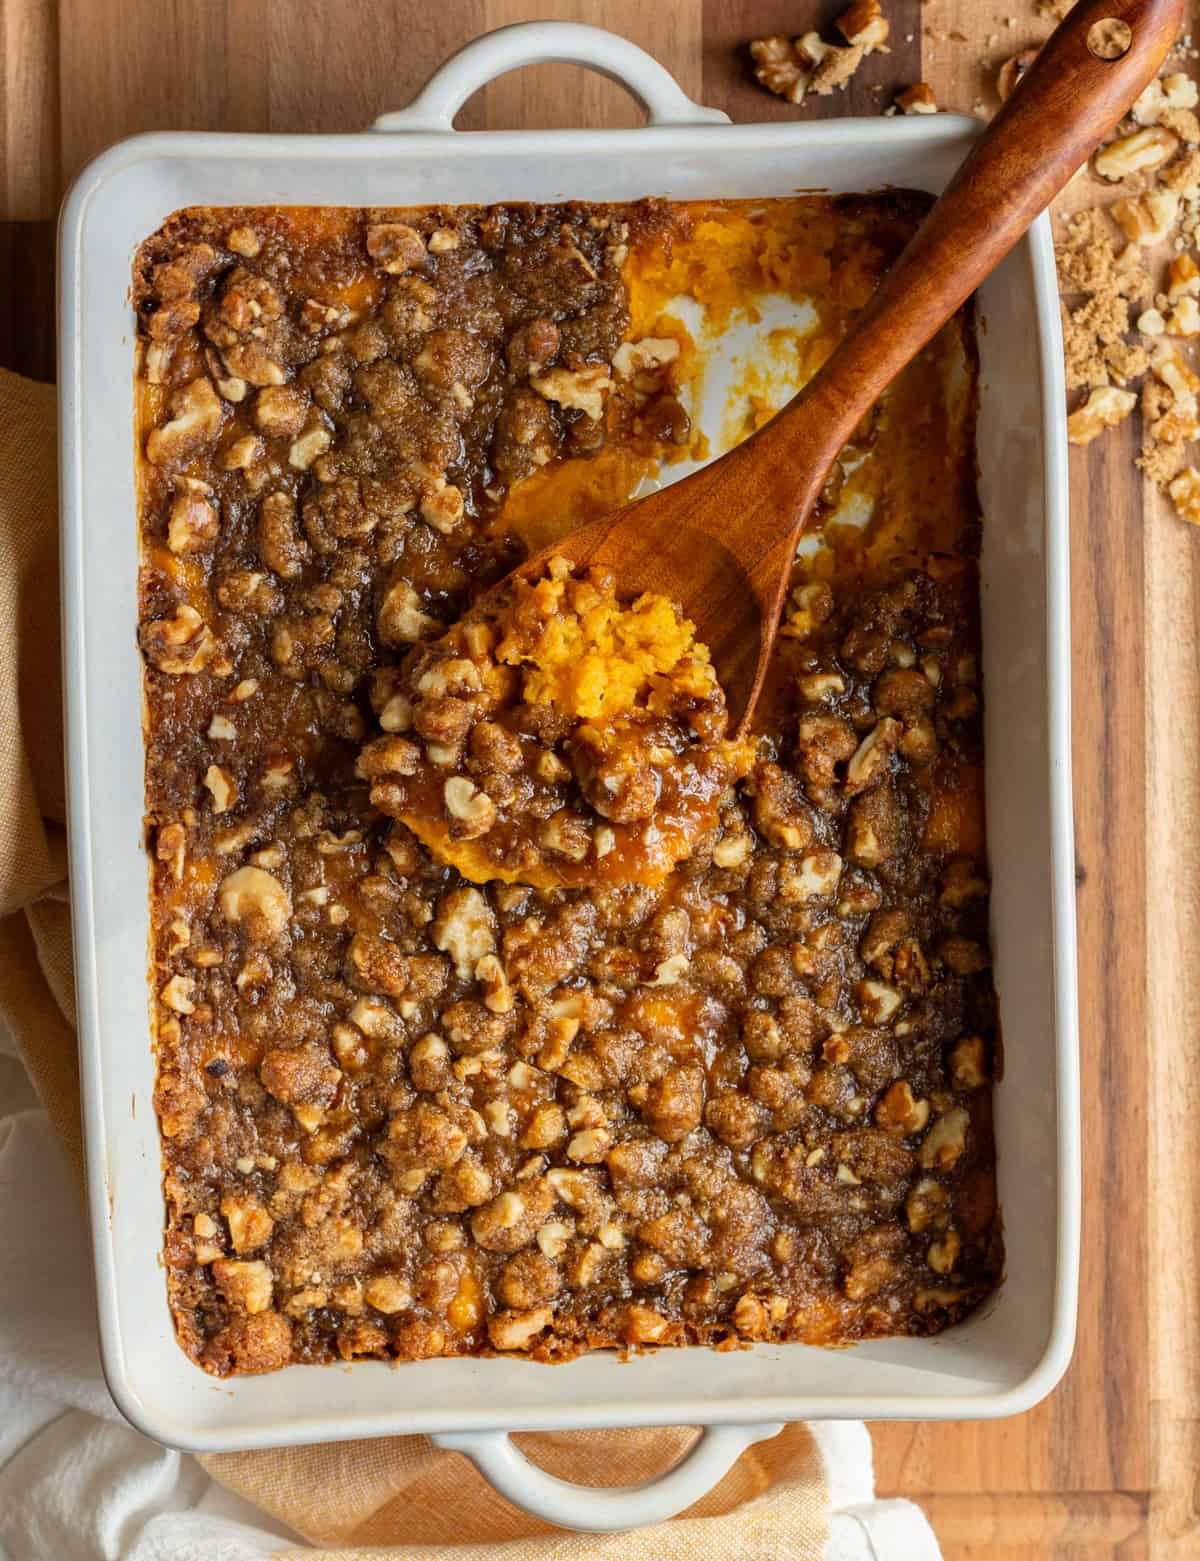 Cooked sweet potato casserole with walnuts in a casserole dish, with a wooden spoon scooping some up.